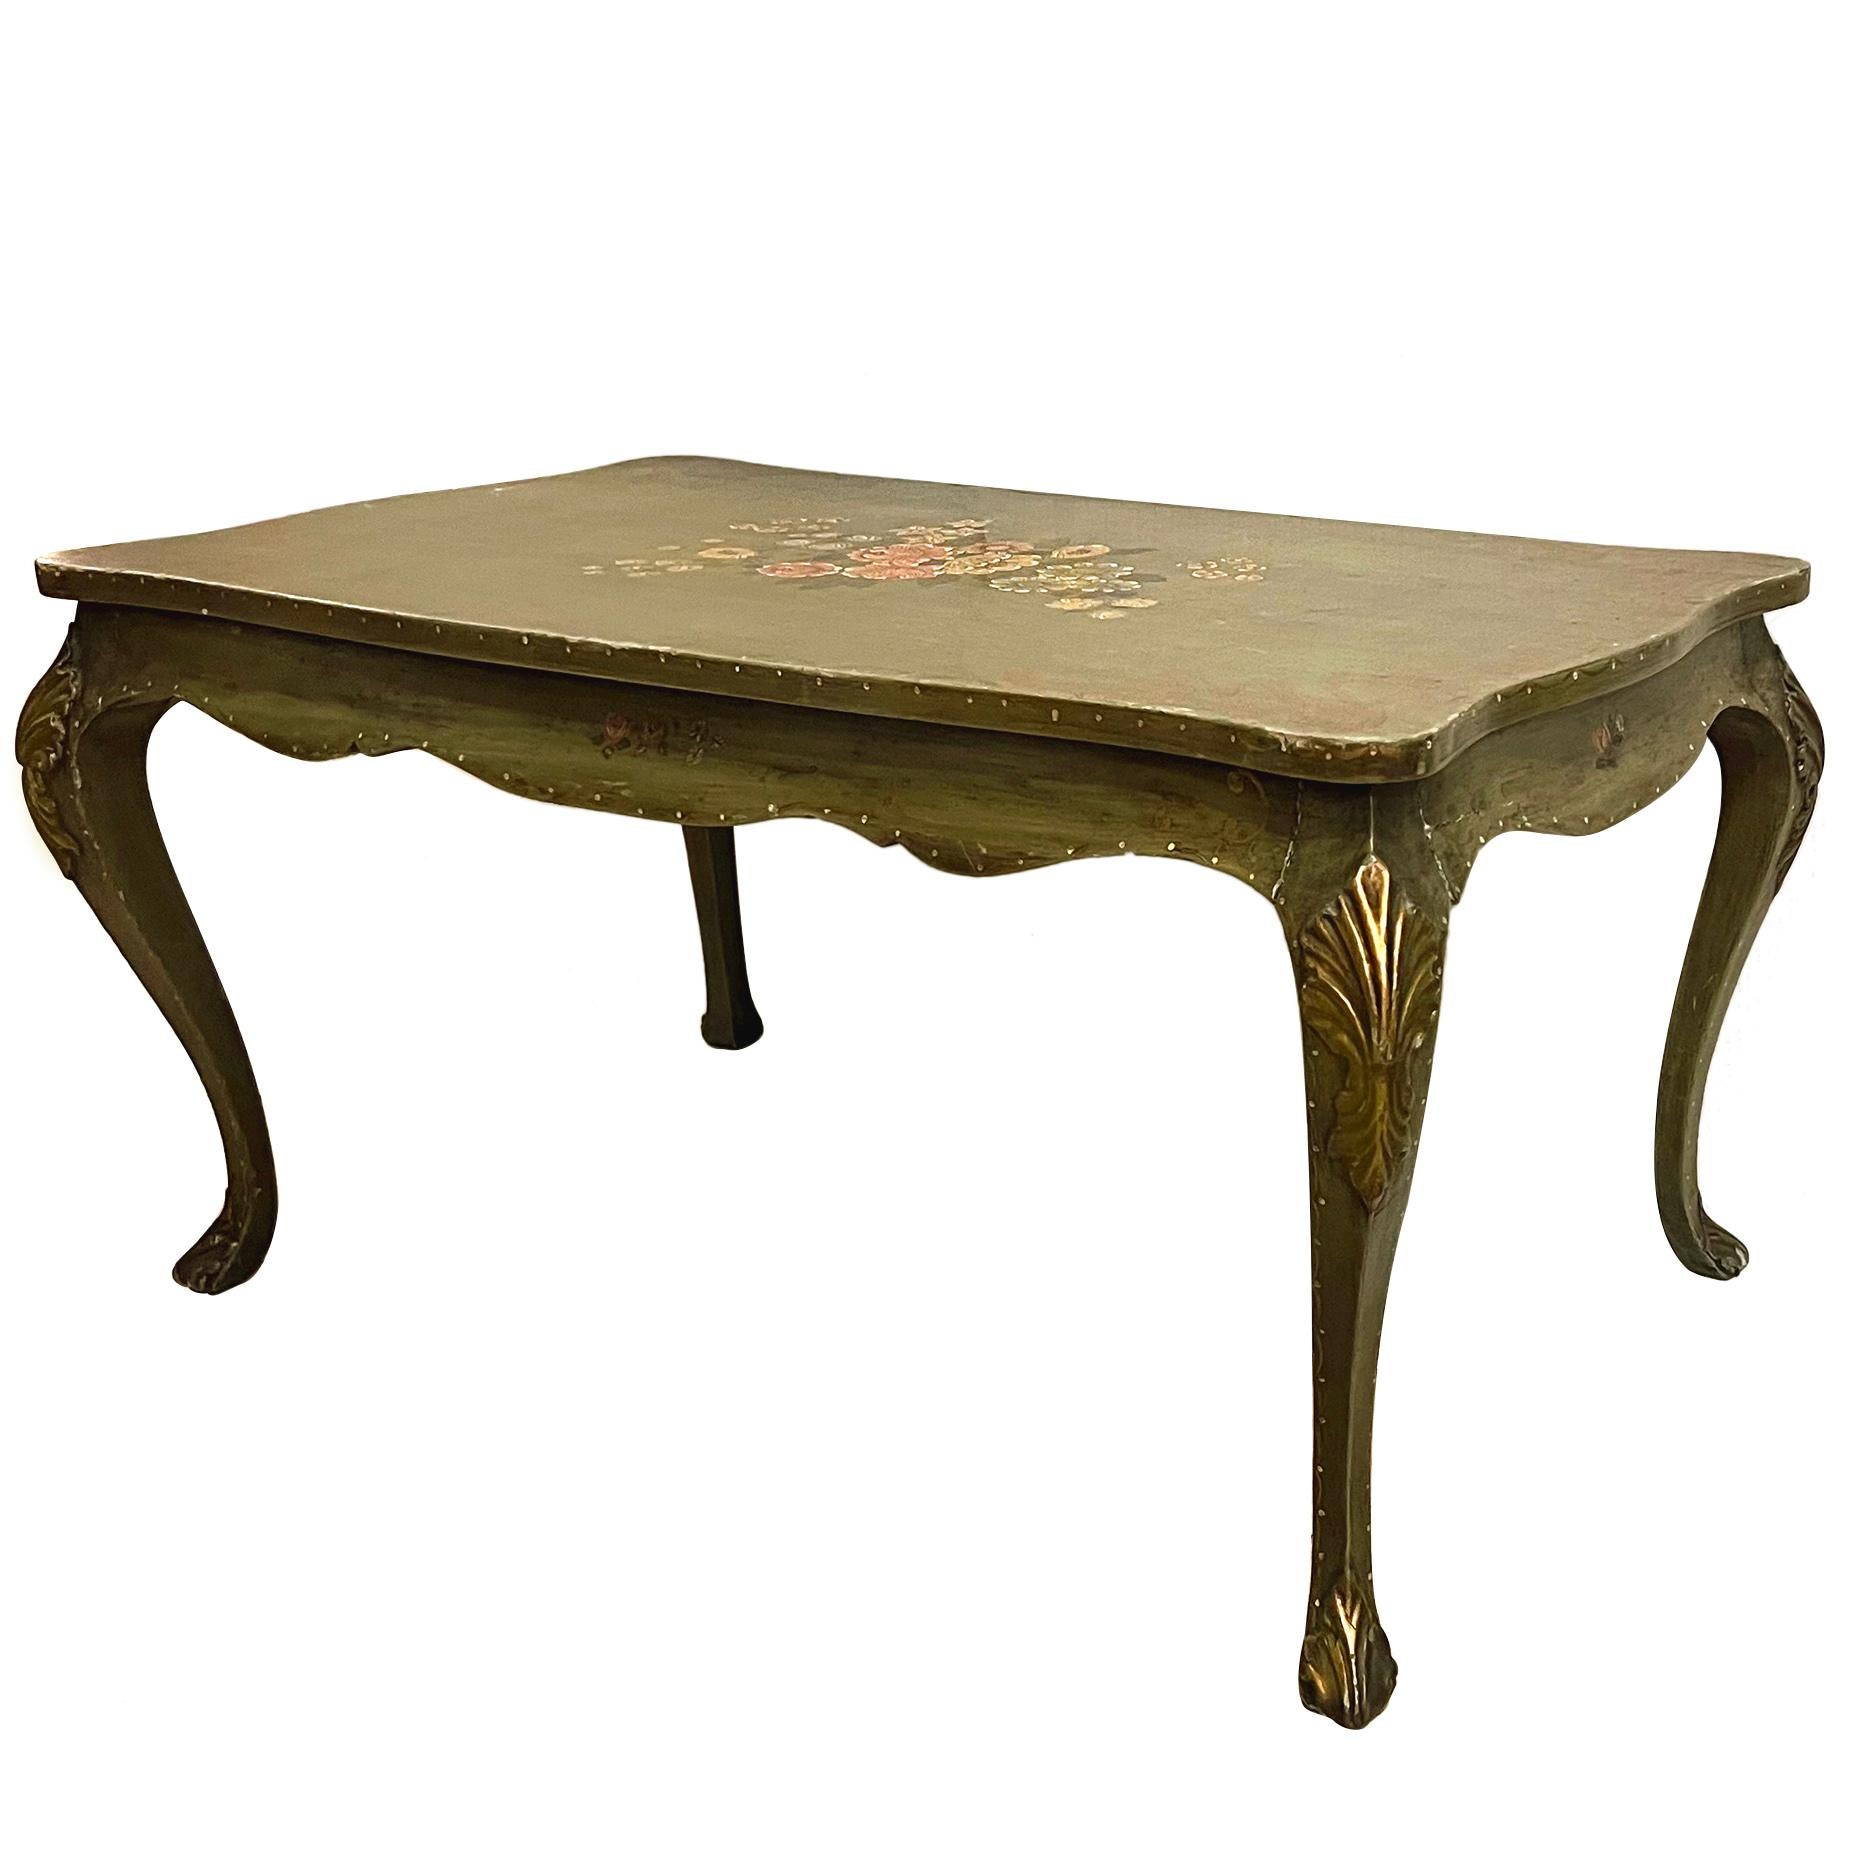 A circa 1920s Italian painted wood coffee table.

Measurements:
Height: 17.75